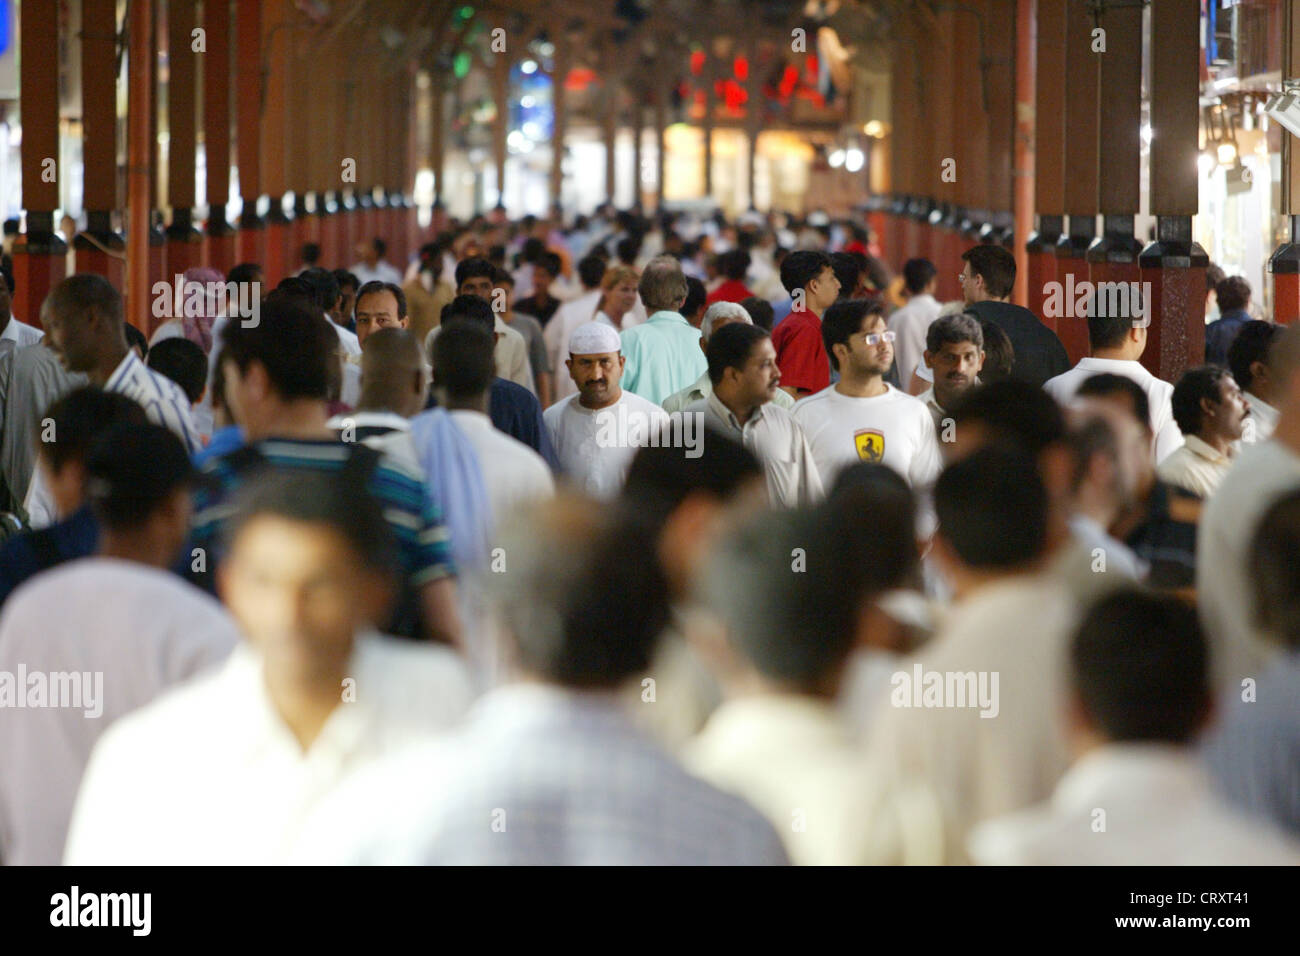 People in a souq in the center of old Dubai Stock Photo